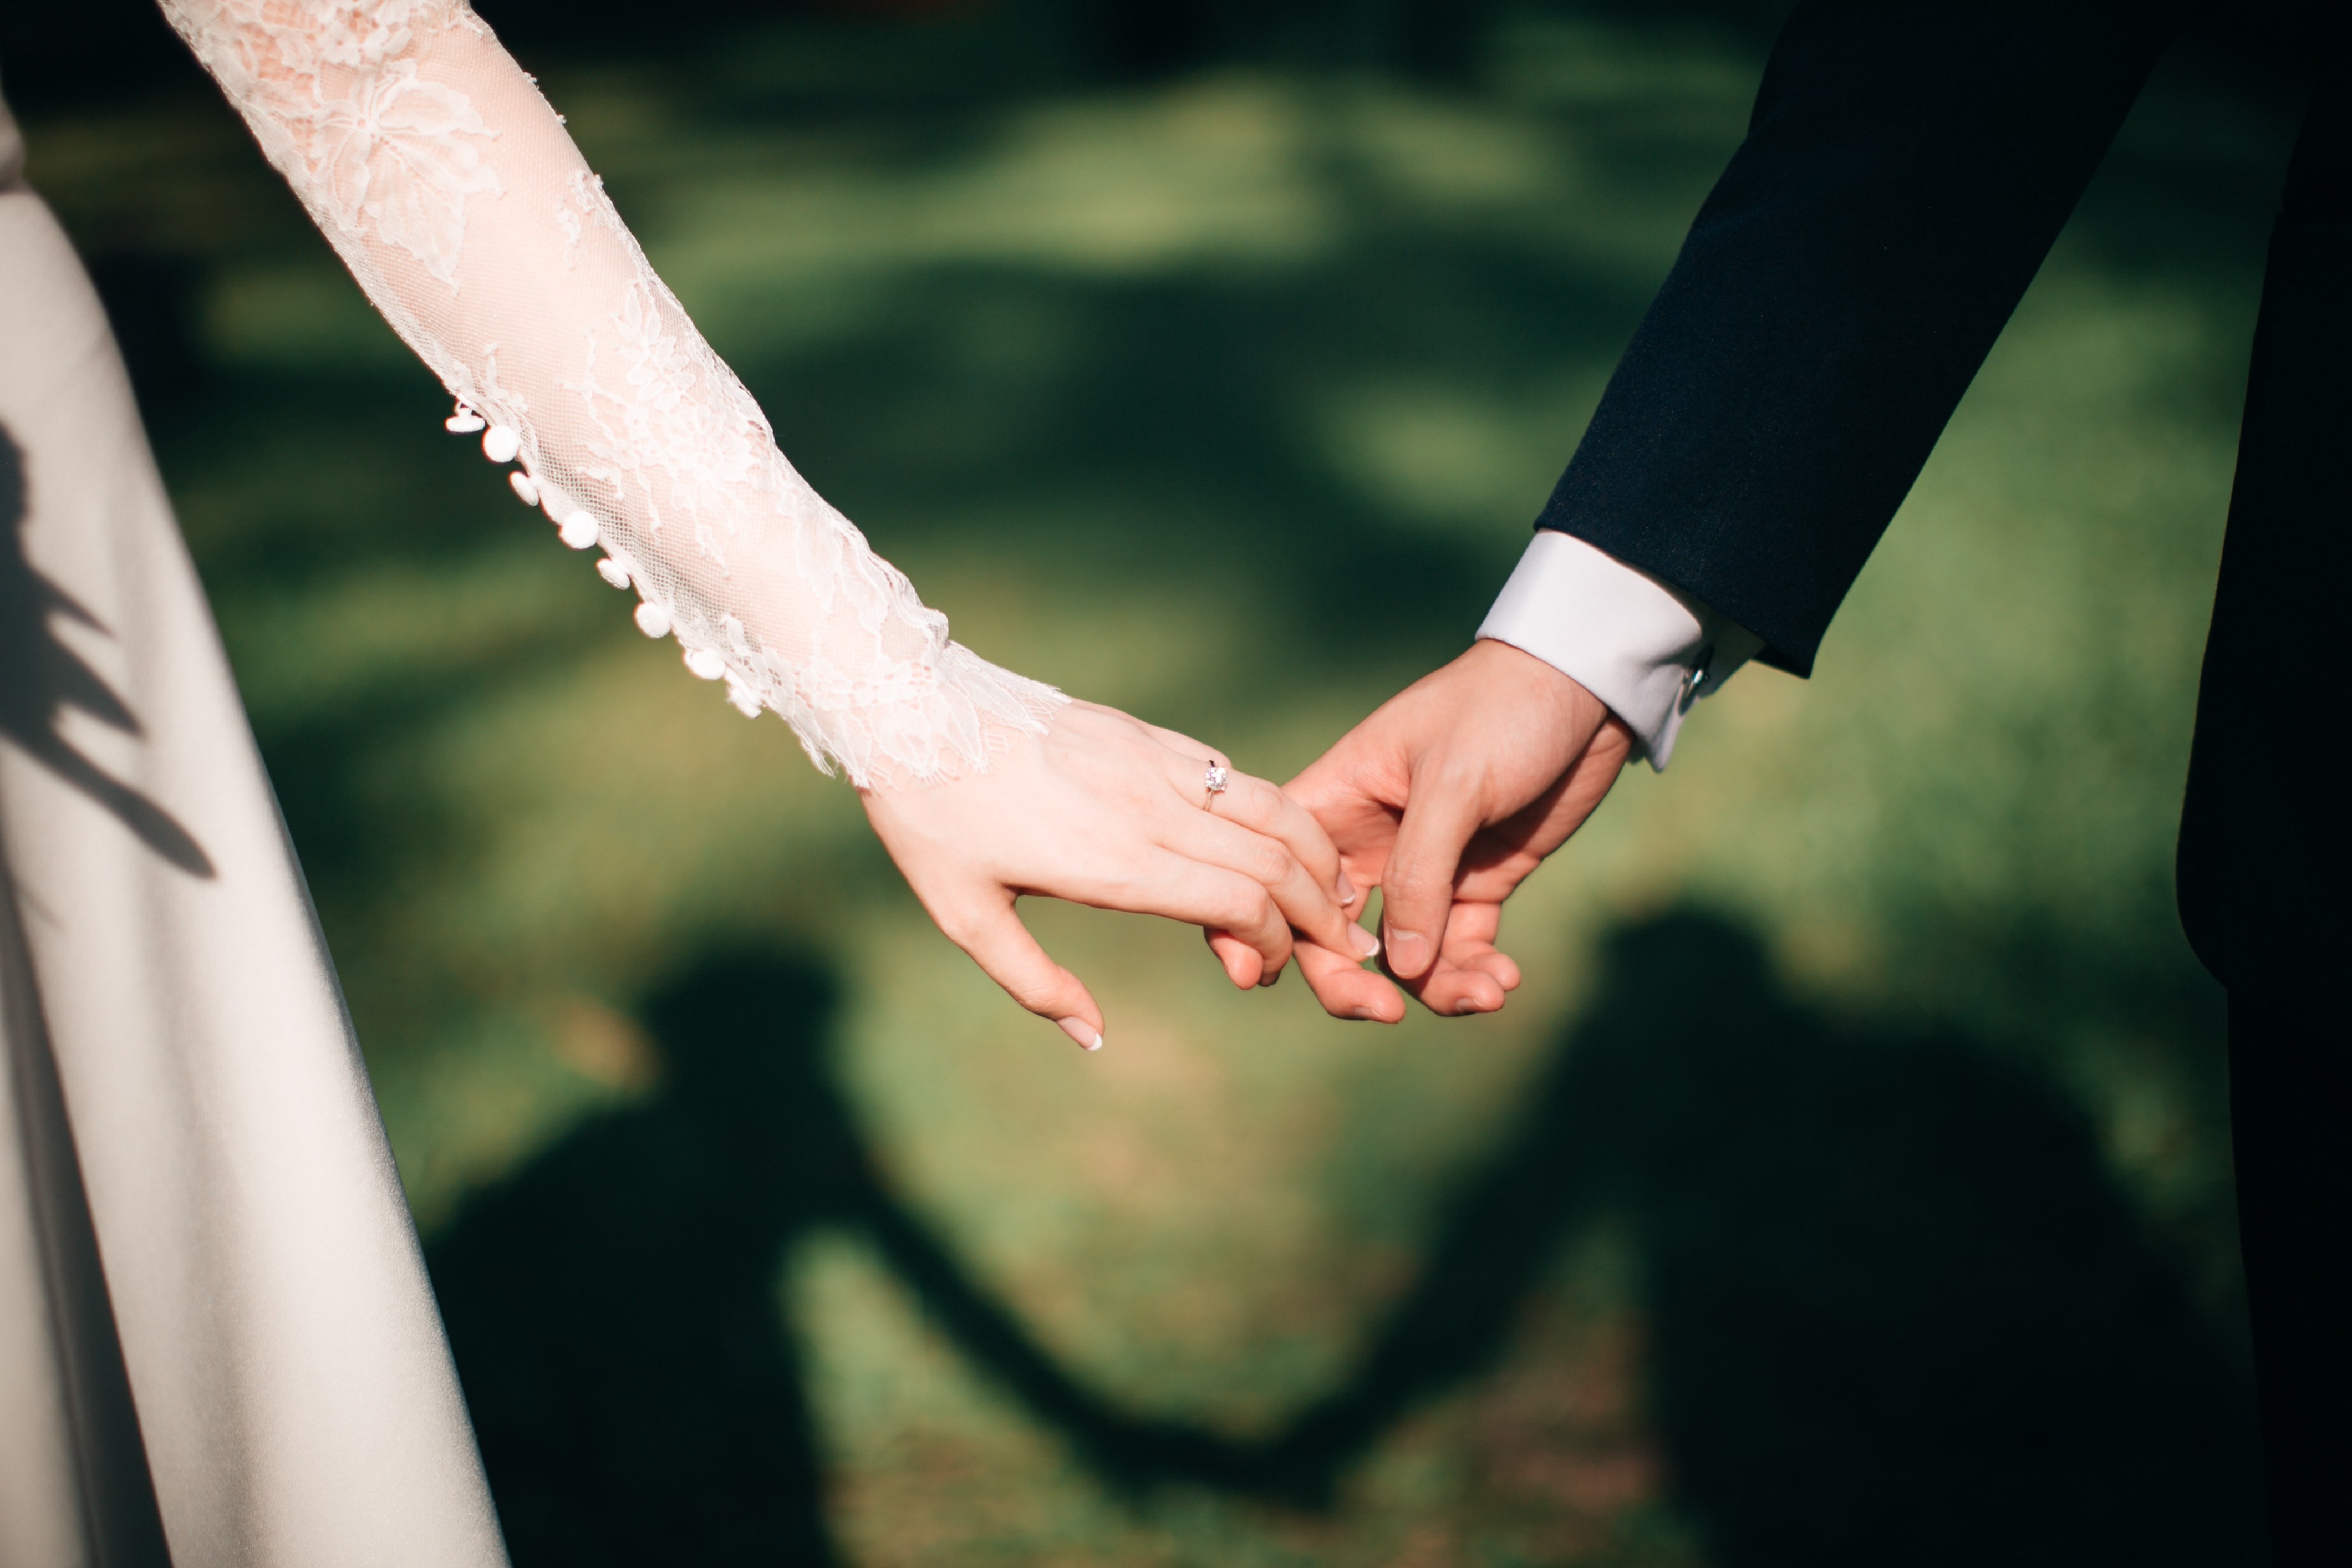 The bride was excited about her wedding but her guy friend thought it was the right time to propose her. | Source: Unsplash